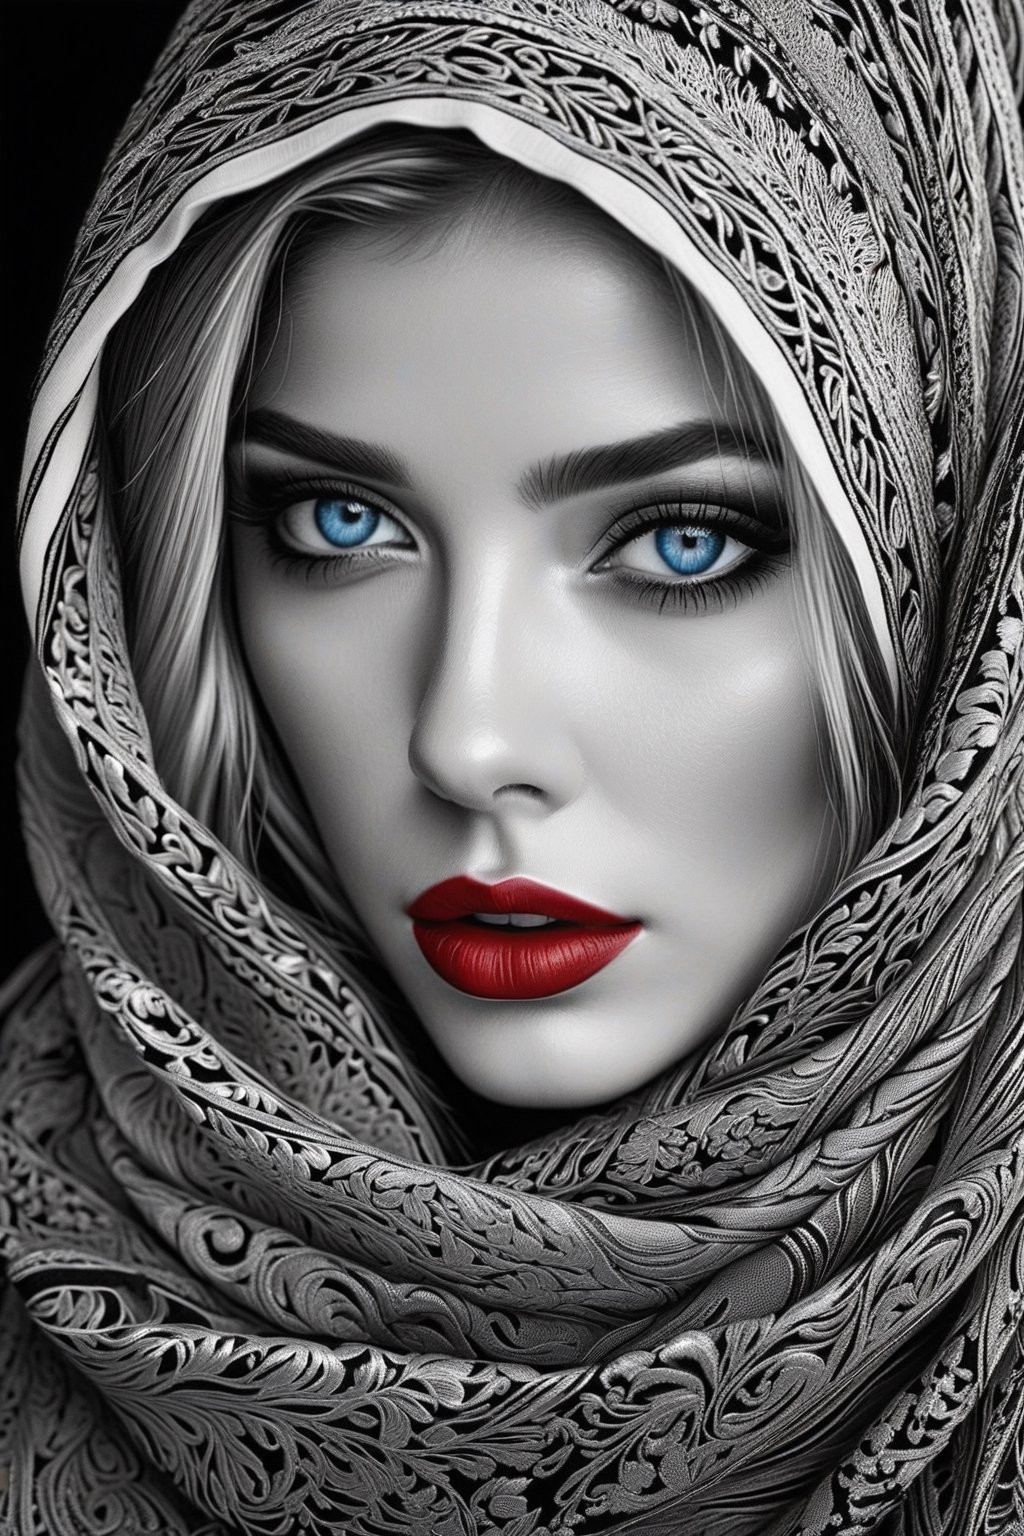 Pencil illustration, black and white, girl adorned with a scarf, her makeup enhancing her features, filigree adding elegance, (((shiny blue eyes, shiny red lips))), octane rendering, ultra-detailed, hyper-realistic, high quality masterpiece, shadows and textures creating depth and dimension, chiaroscuro effect, intricate details captured in each strand of hair and stitch of the scarf.